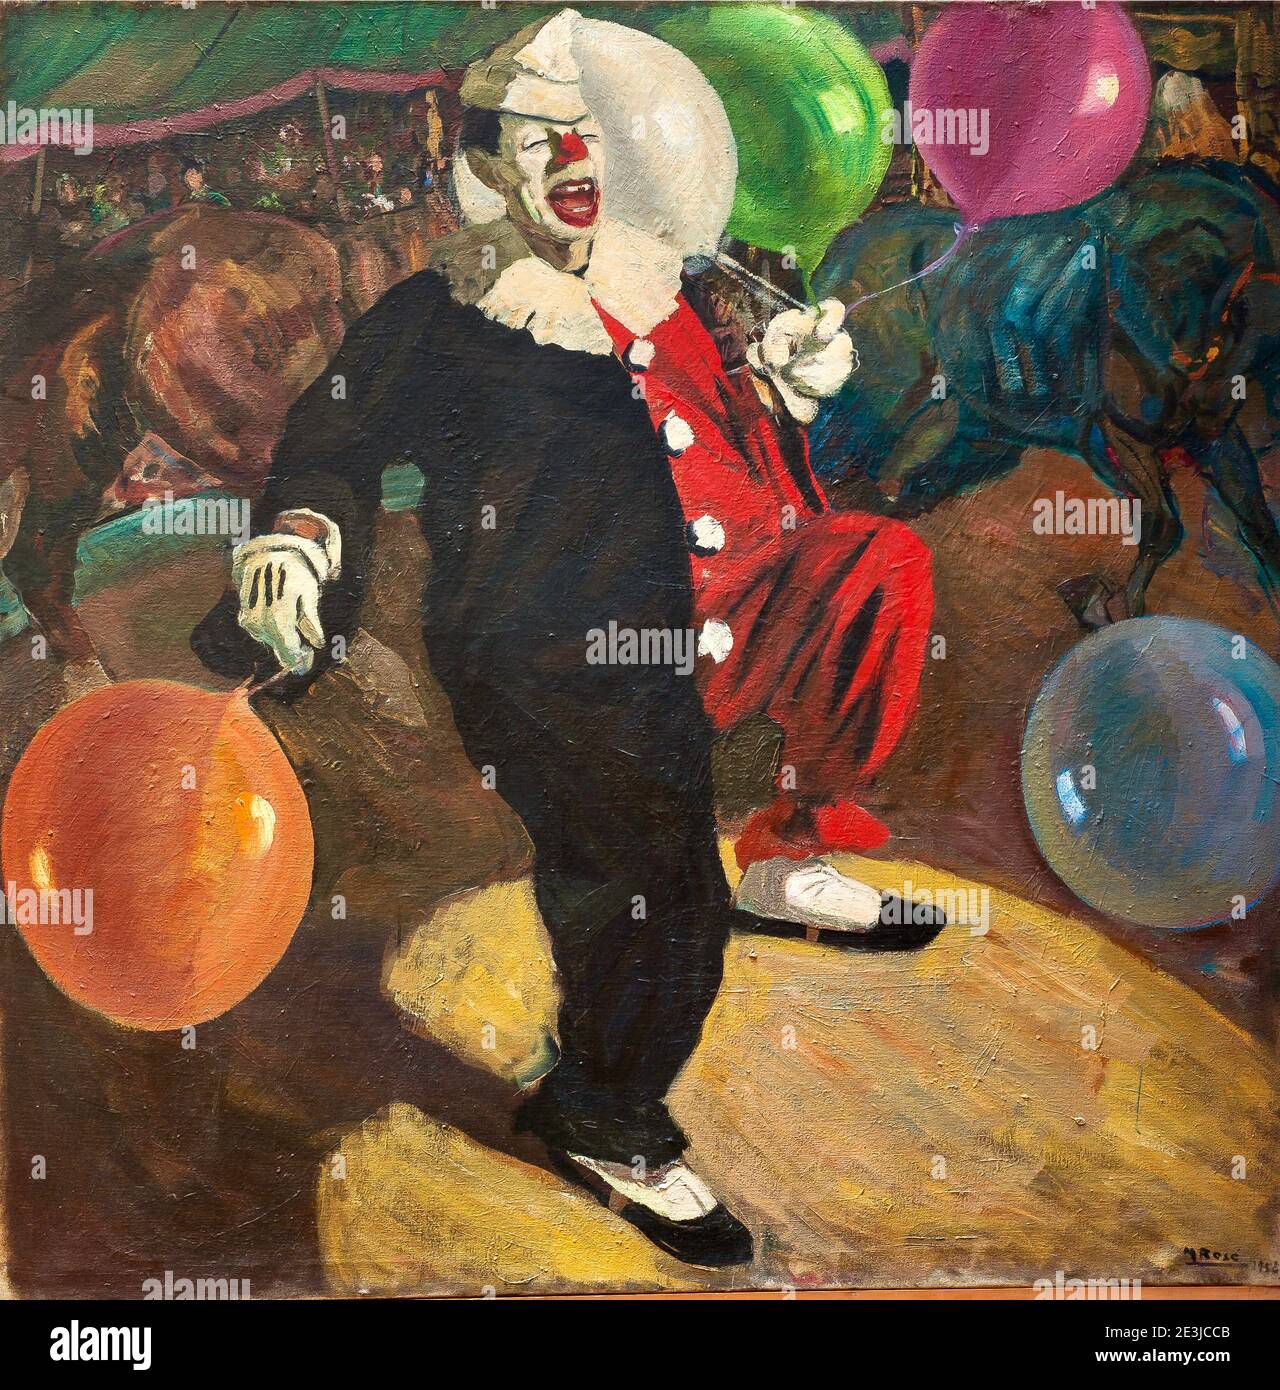 Artwork by Manuel Rose entitled El Payaso con Globo or The Clown with Balloons - 1952. Stock Photo